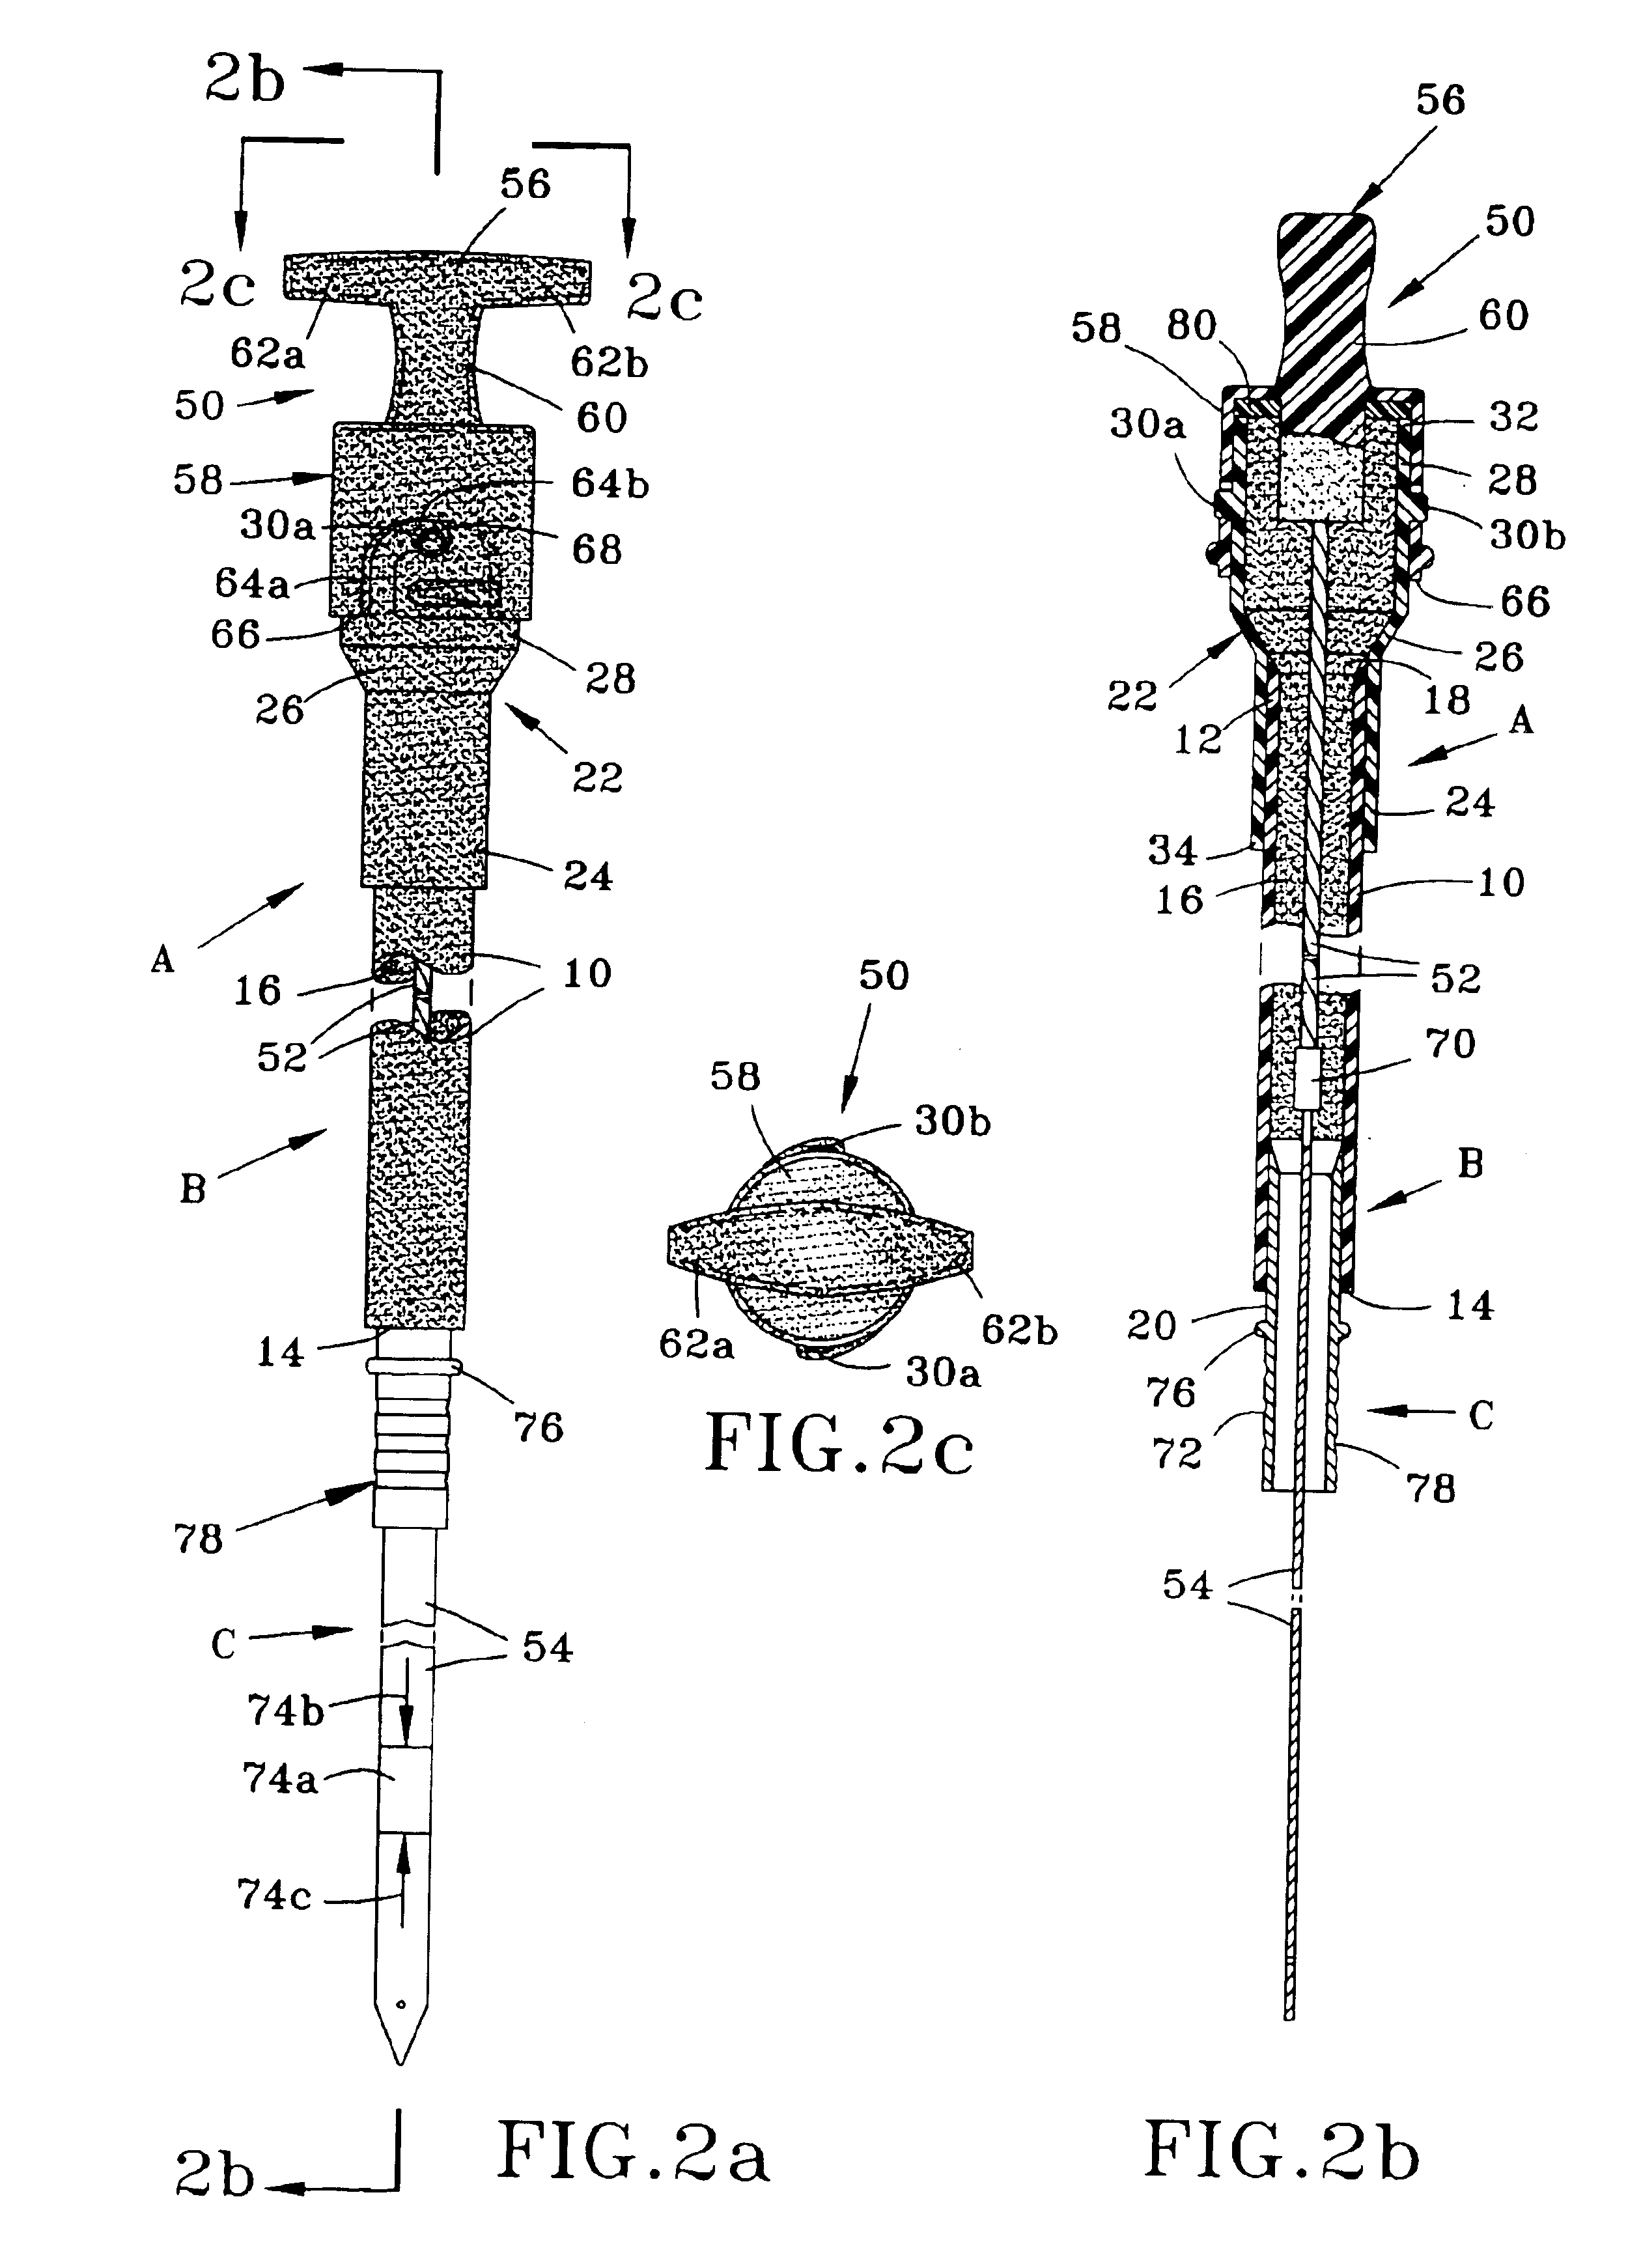 Connection system for a fluid level measuring device